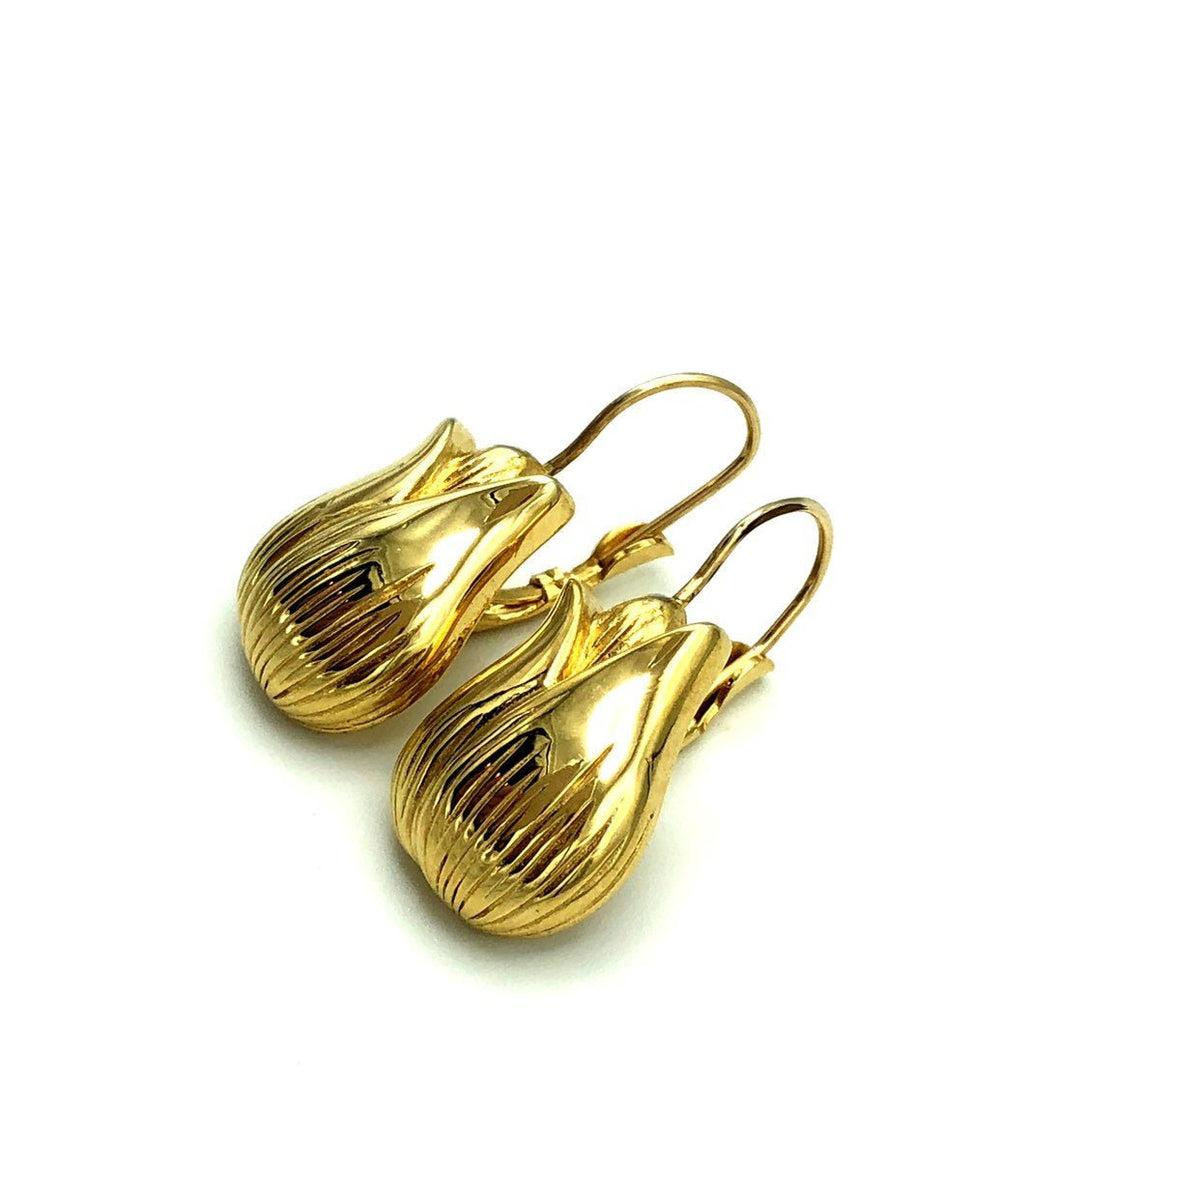 Givenchy Gold Tulip Vintage Dangle Drop Pierced Earrings - 24 Wishes Vintage Jewelry